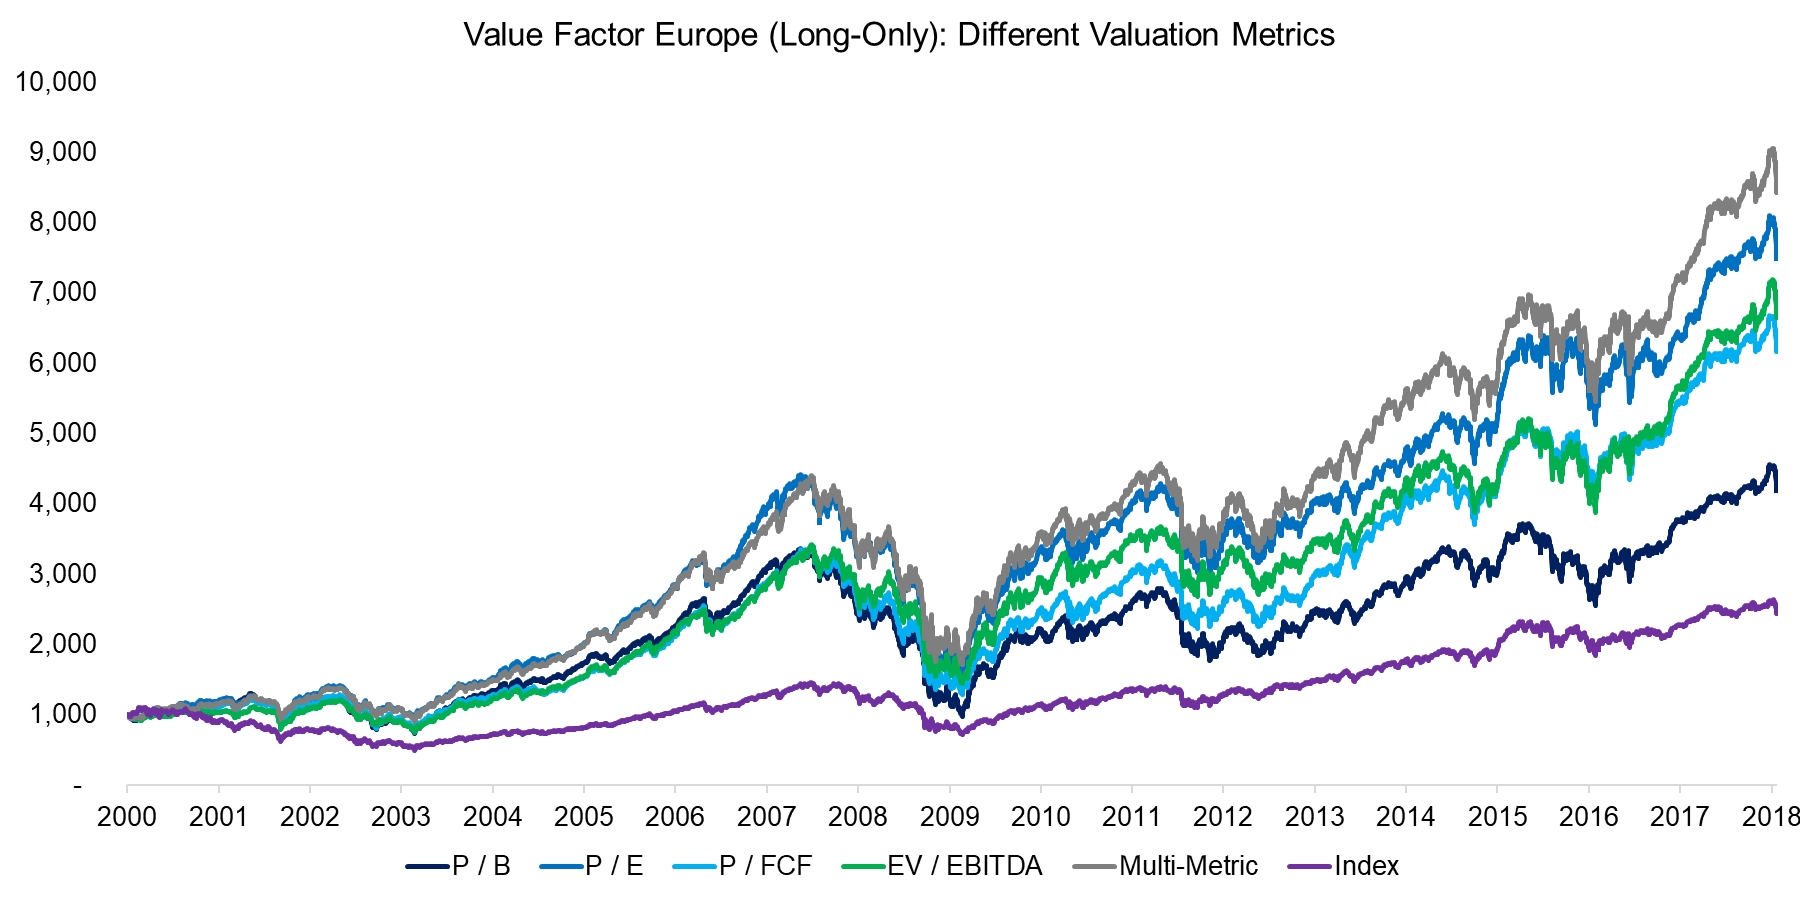 Value Factor Europe (Long-Only) Different Valuation Metrics